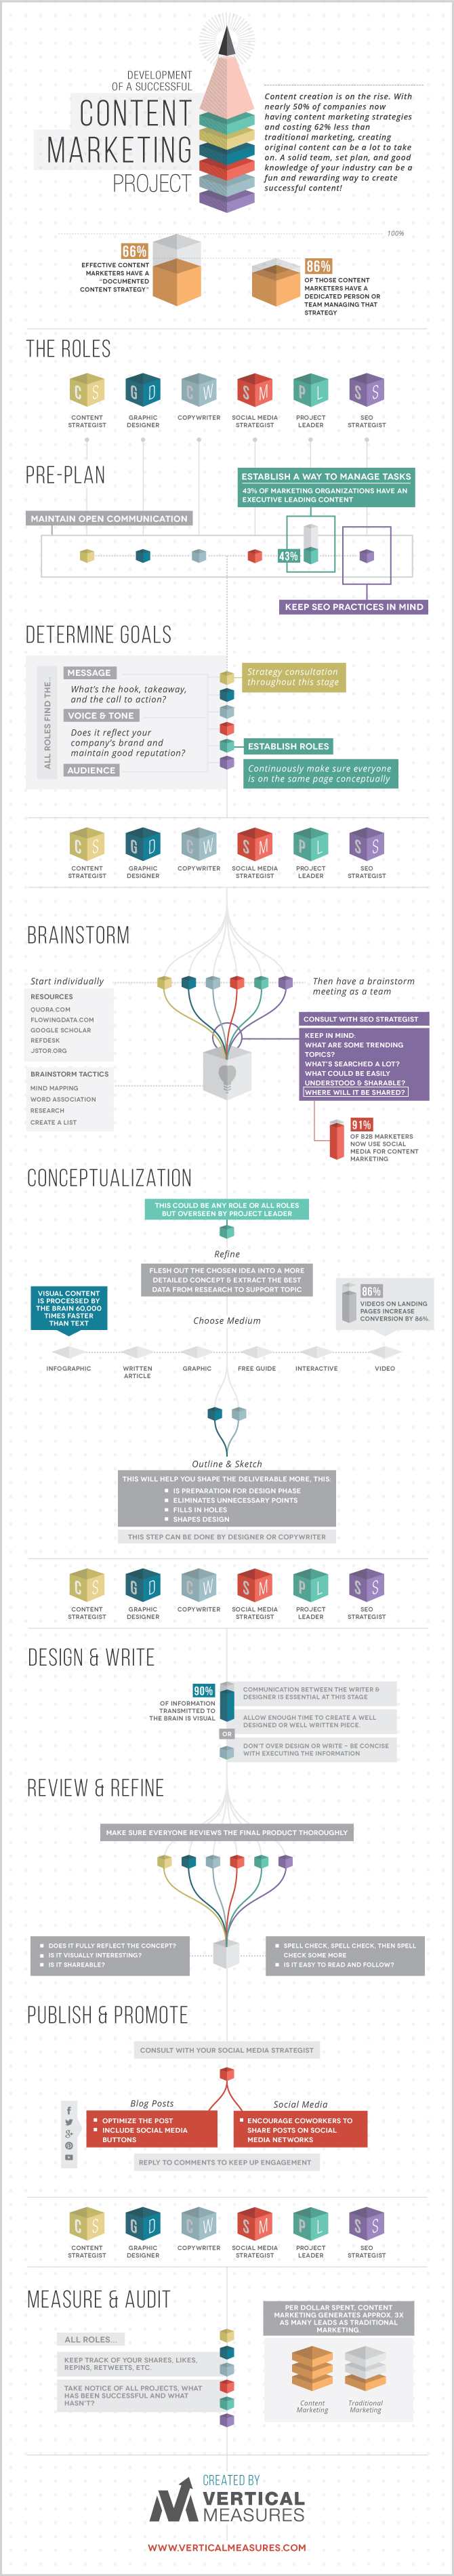 Developing a Successful Content Marketing Project - infographic